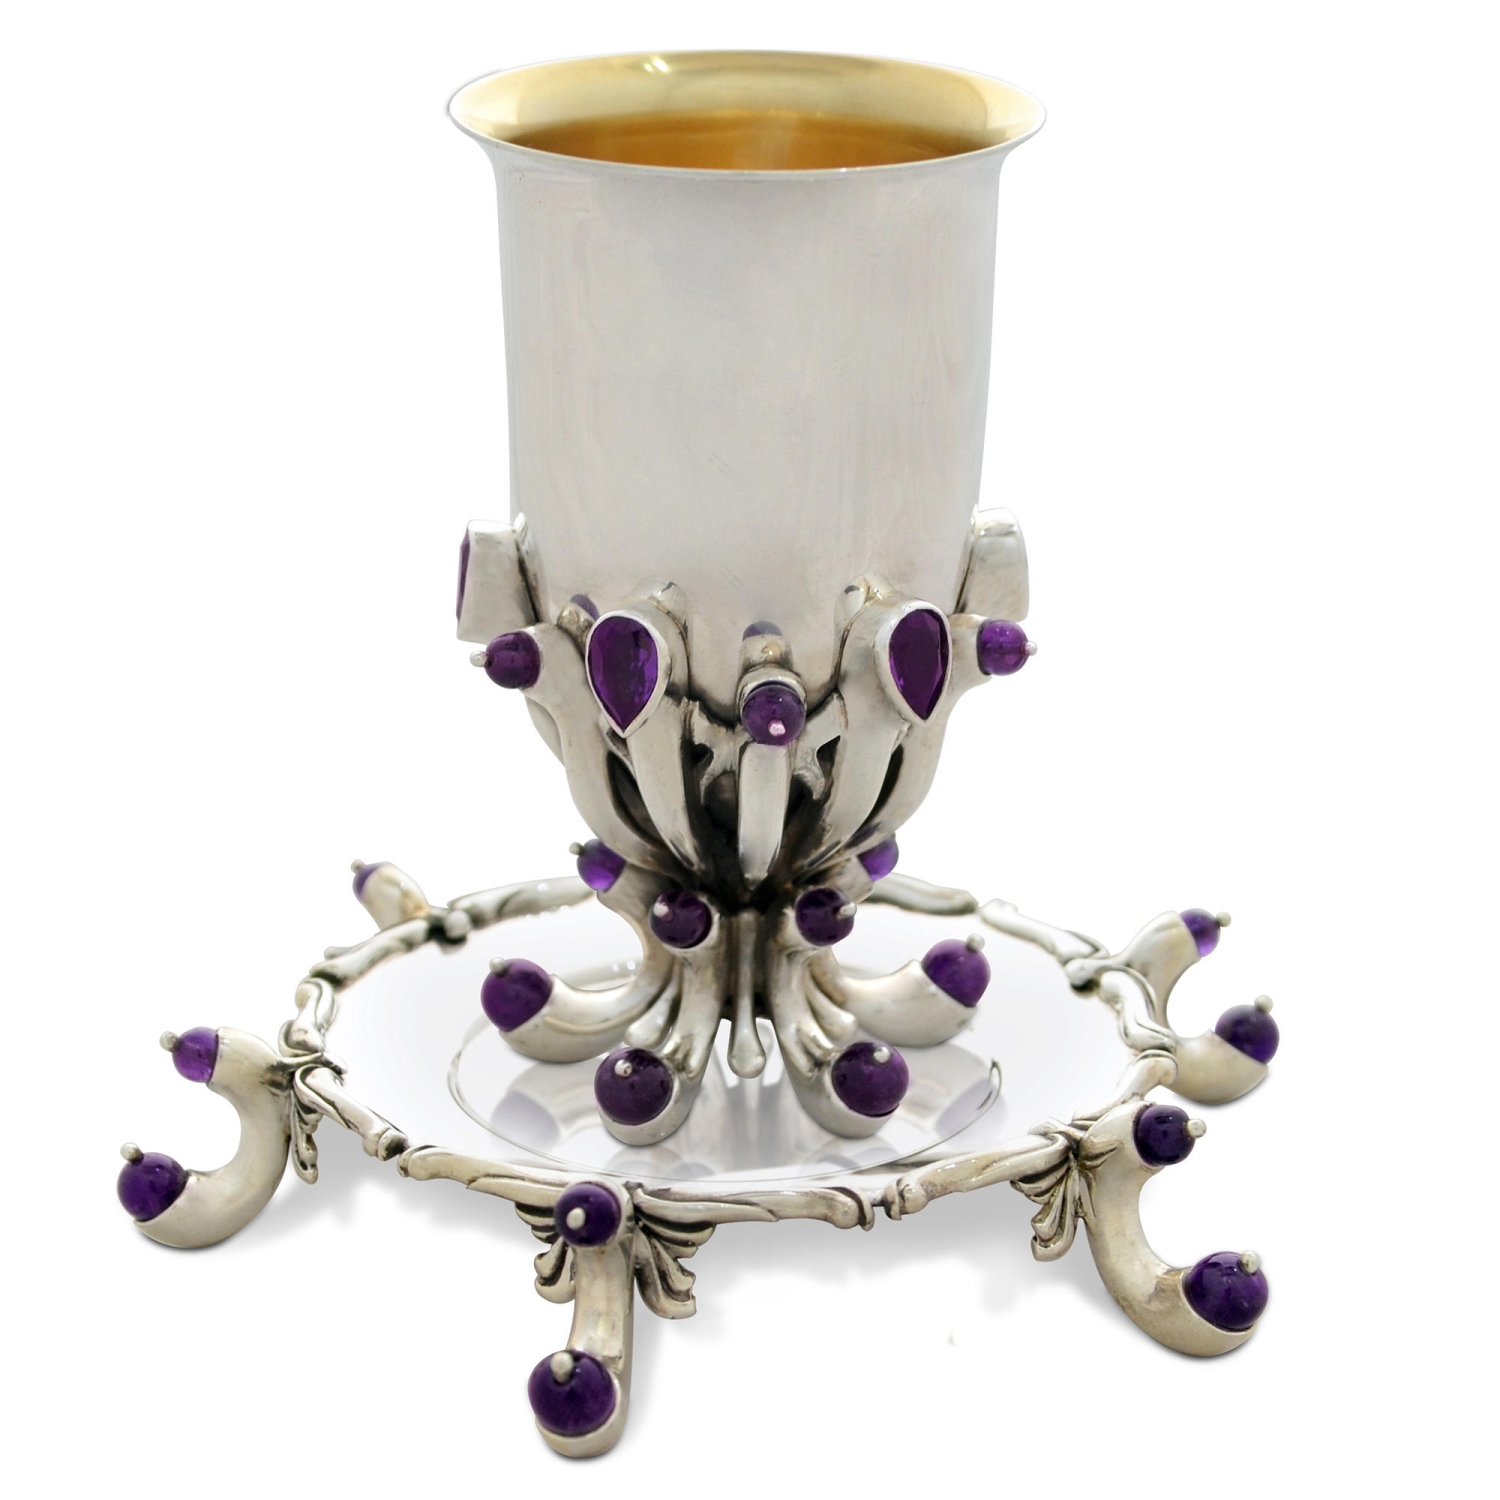 Nadav Art Sterling Silver Kiddush Cup and Tray with Amethysts - 1